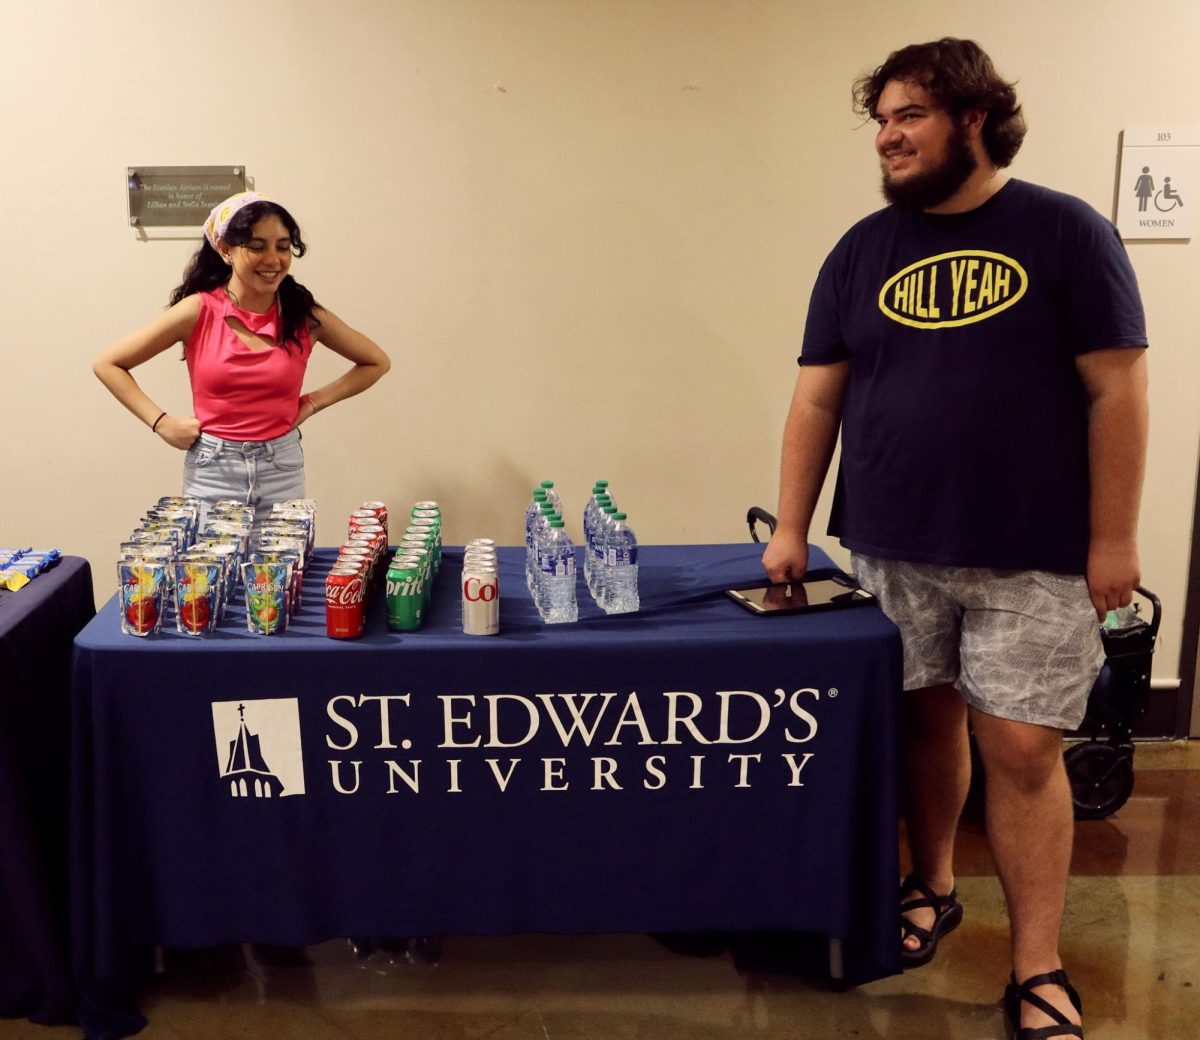 Refreshments provided by St Edwards for students to enjoy during the film.